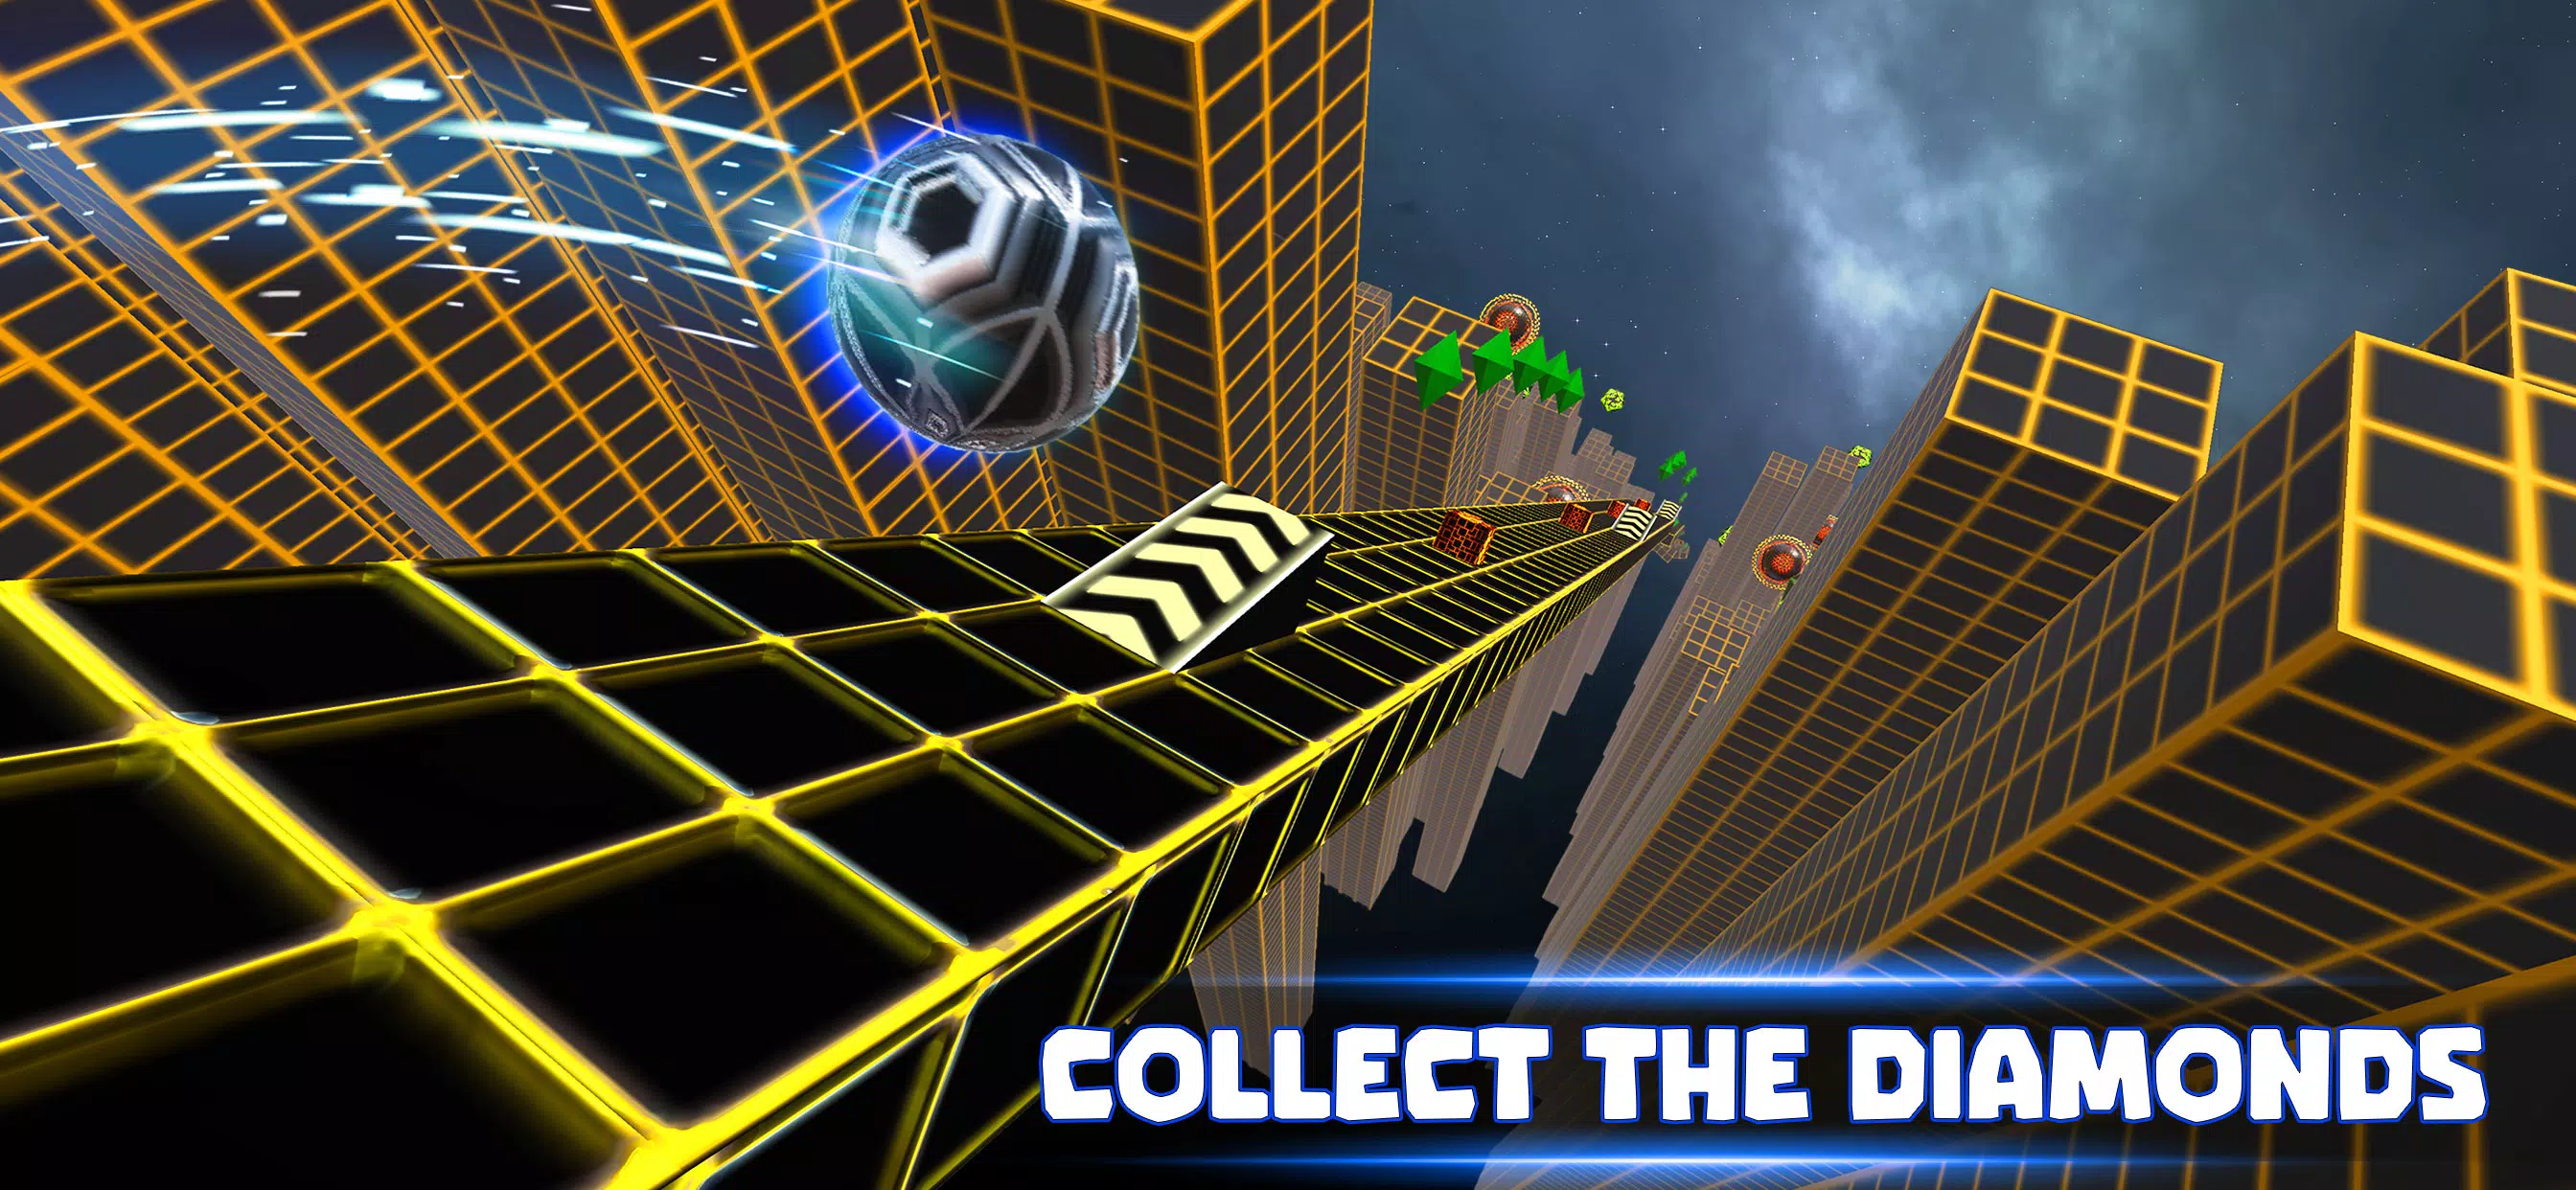 Play TWO BALL 3D Online Unblocked - 77 GAMES.io